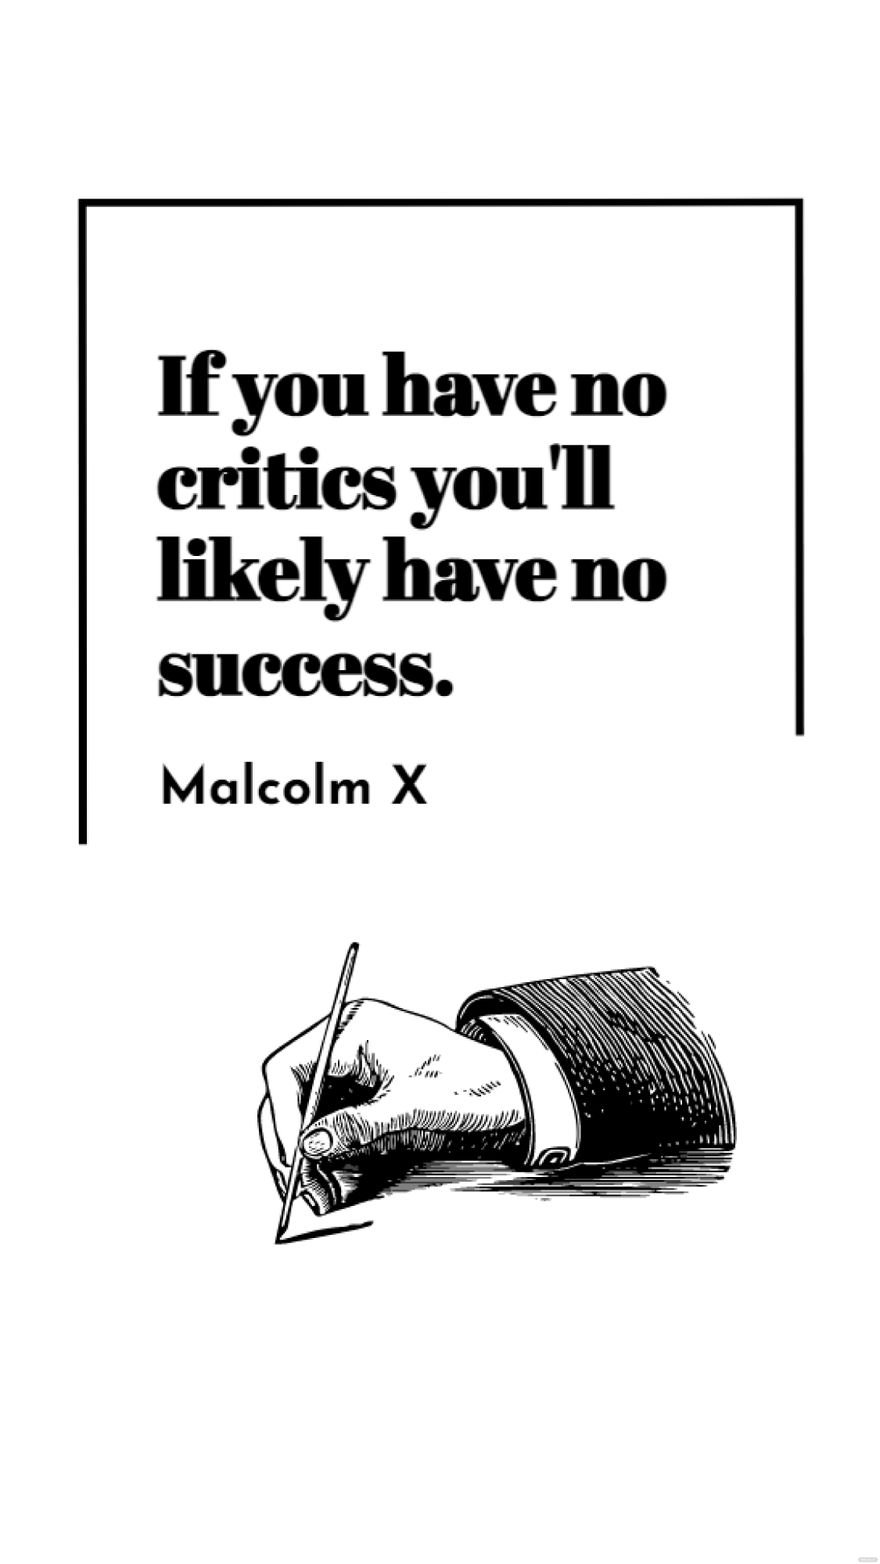 Free Malcolm X - If you have no critics you'll likely have no success. in JPG